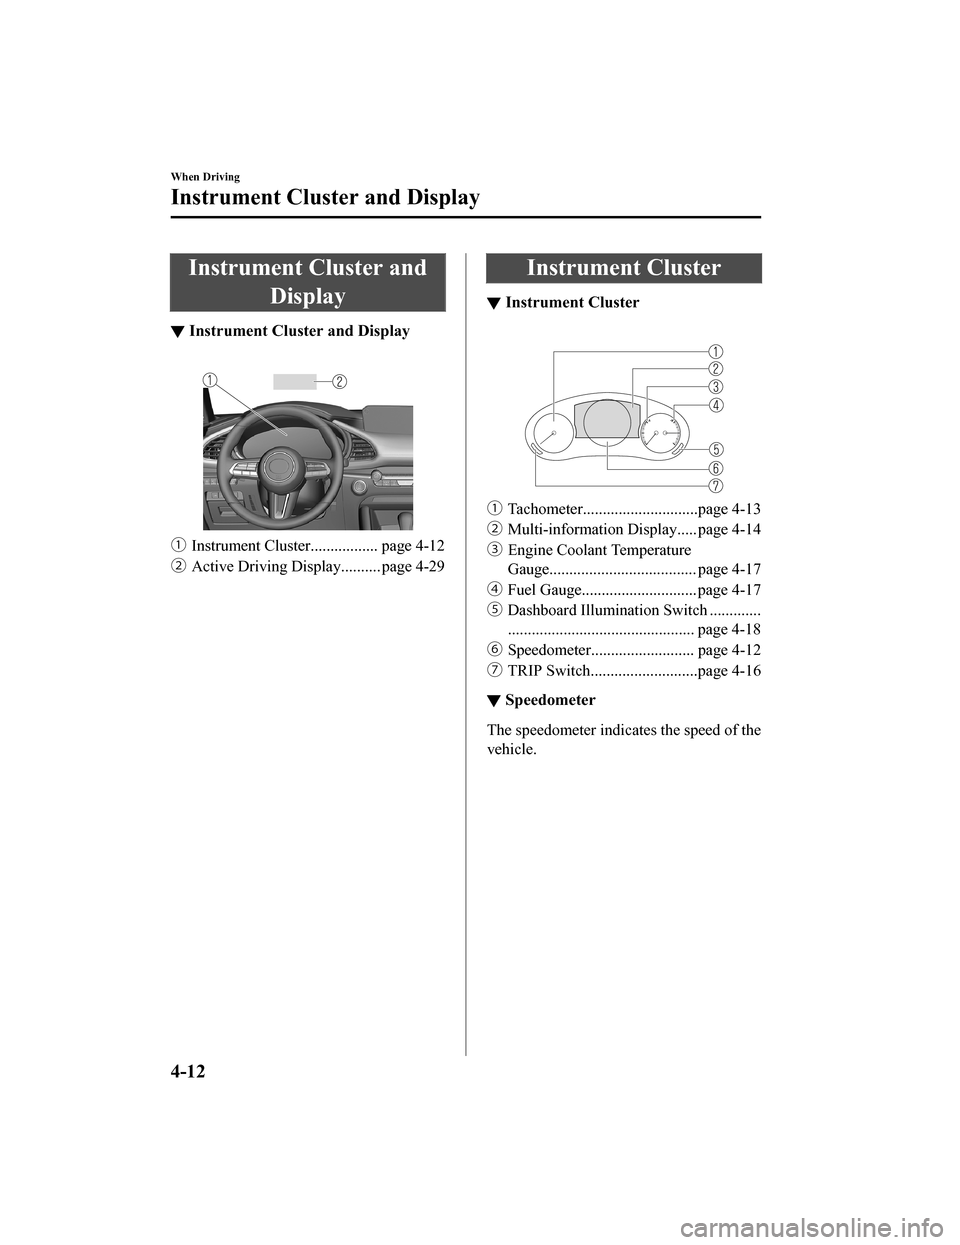 MAZDA MODEL 3 HATCHBACK 2020  Owners Manual (in English) Instrument Cluster andDisplay
▼Instrument Cluster and Display
 
ƒ
Instrument Cluster................. page 4-12
„ Active Driving Displa y.......... page 4-29
Instrument Cluster
▼Instrument Cl